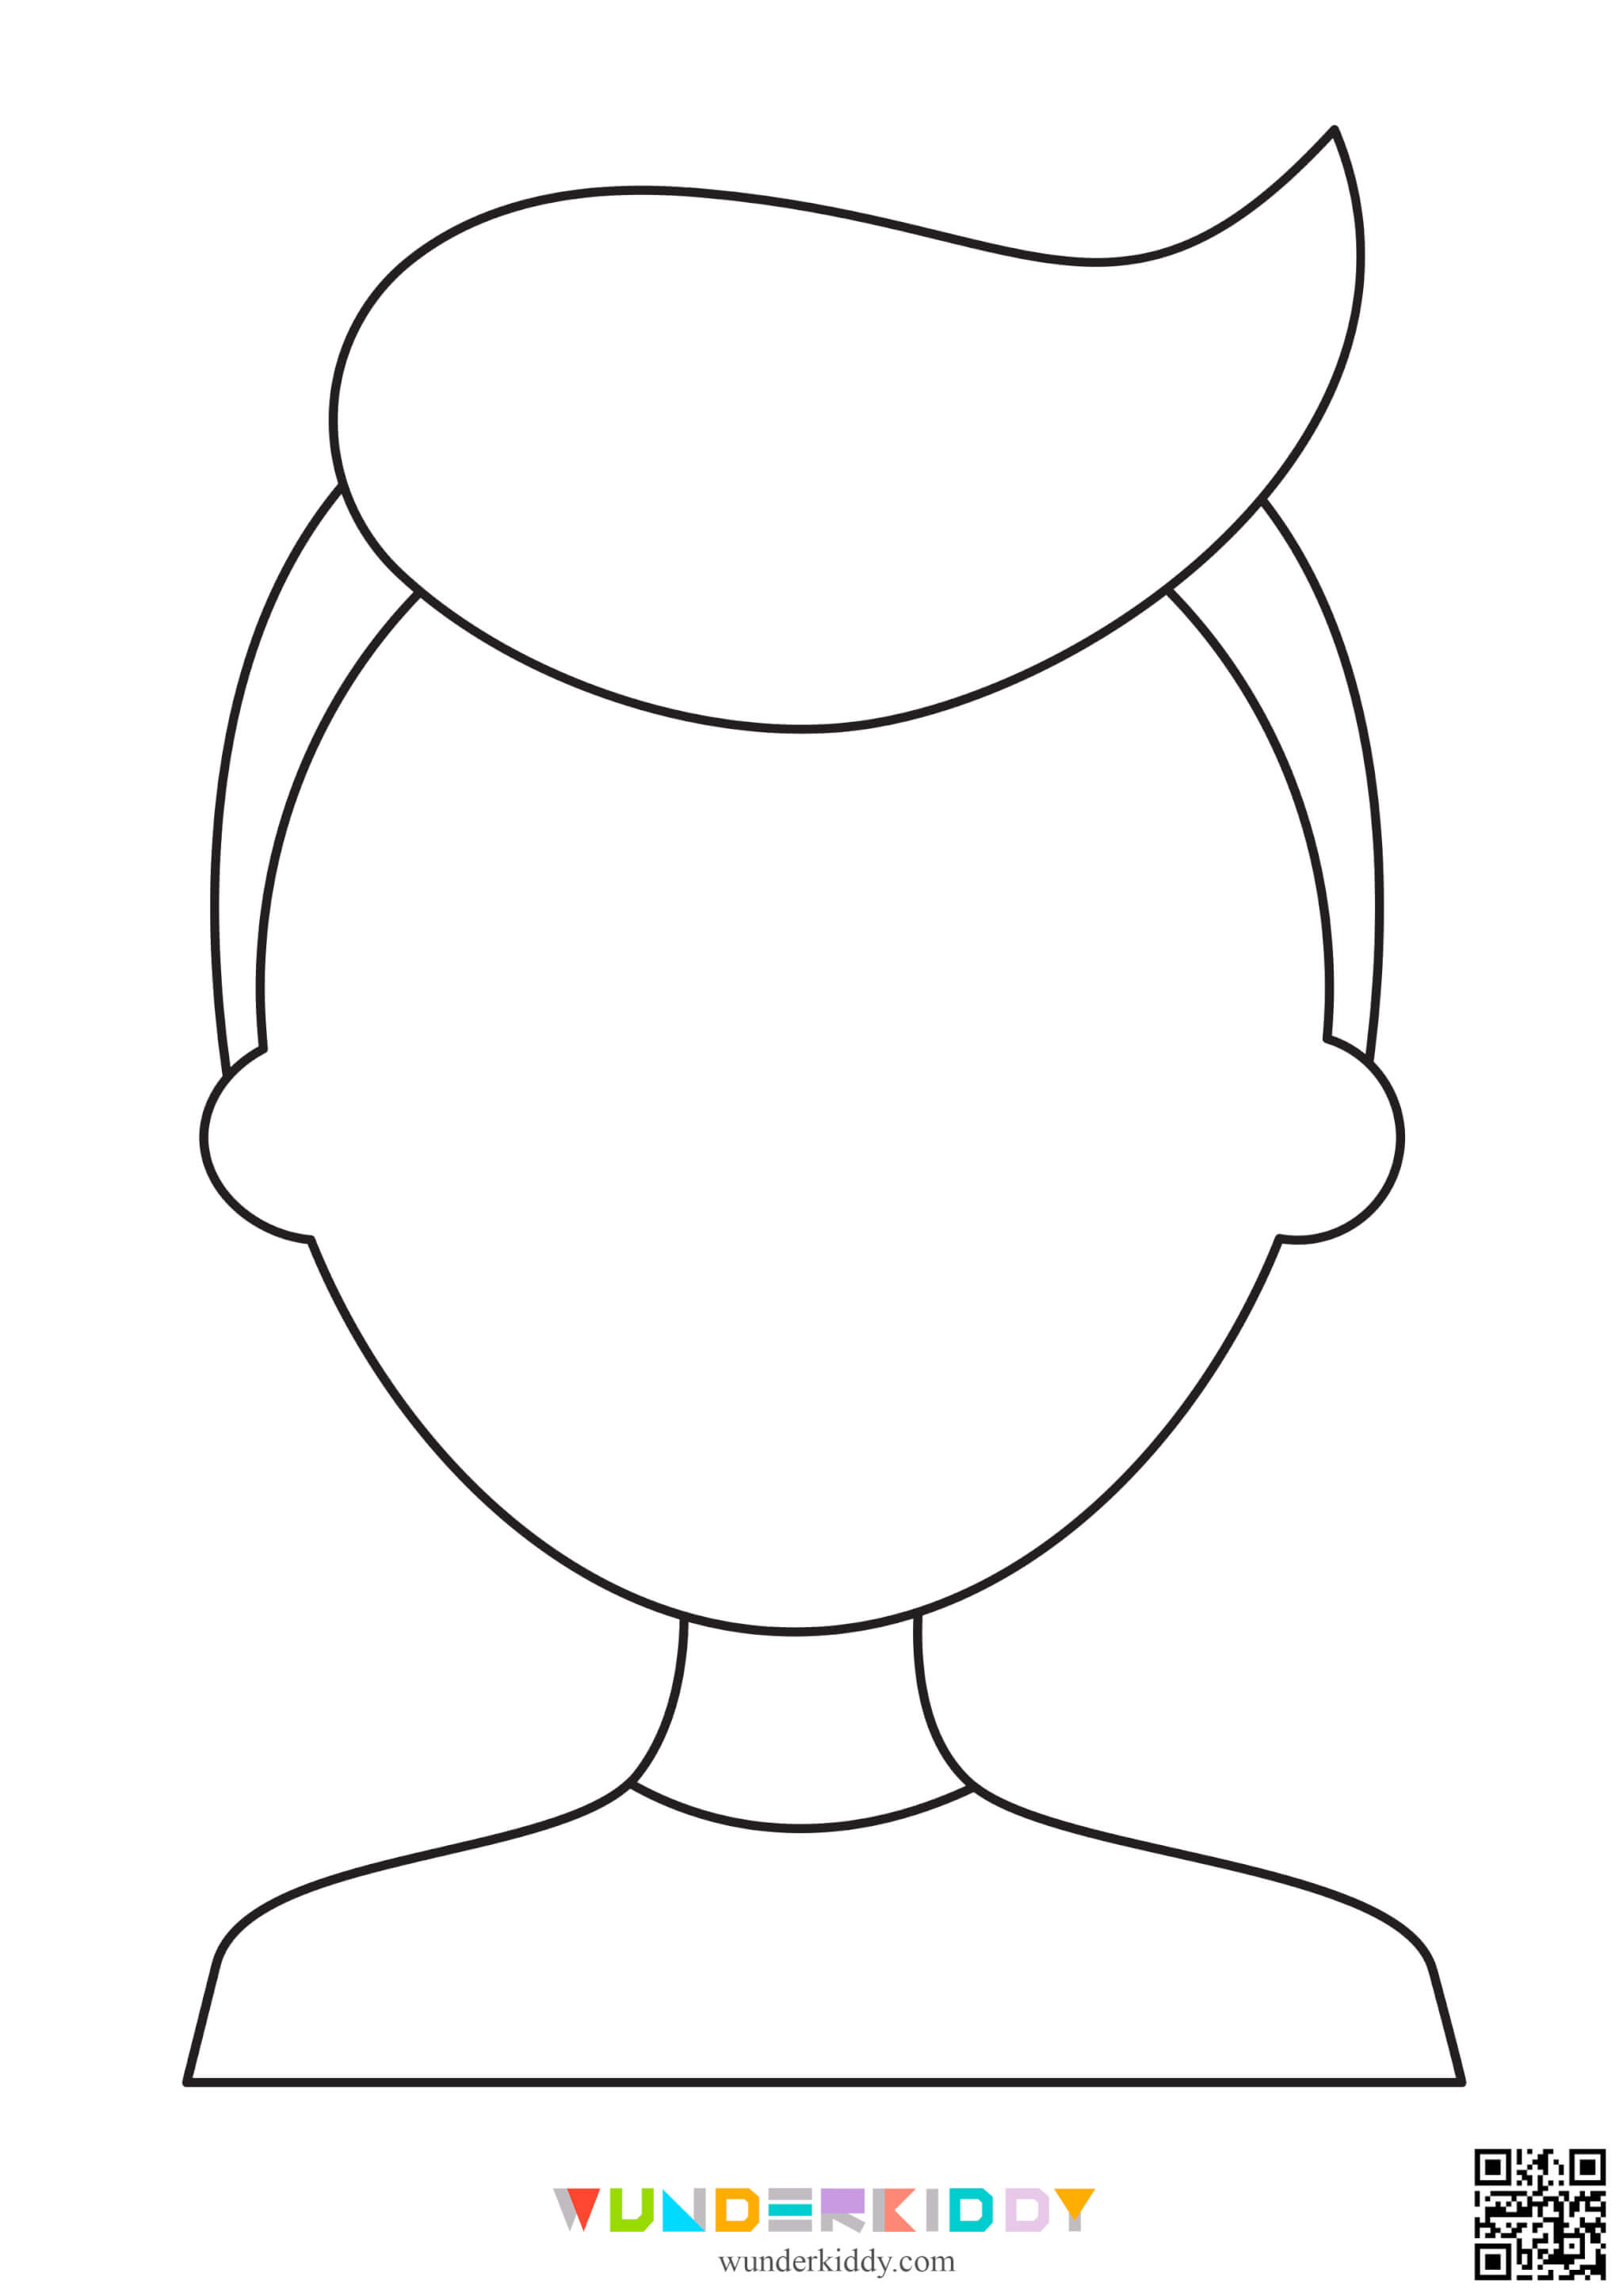 Blank Face Template - Image 7